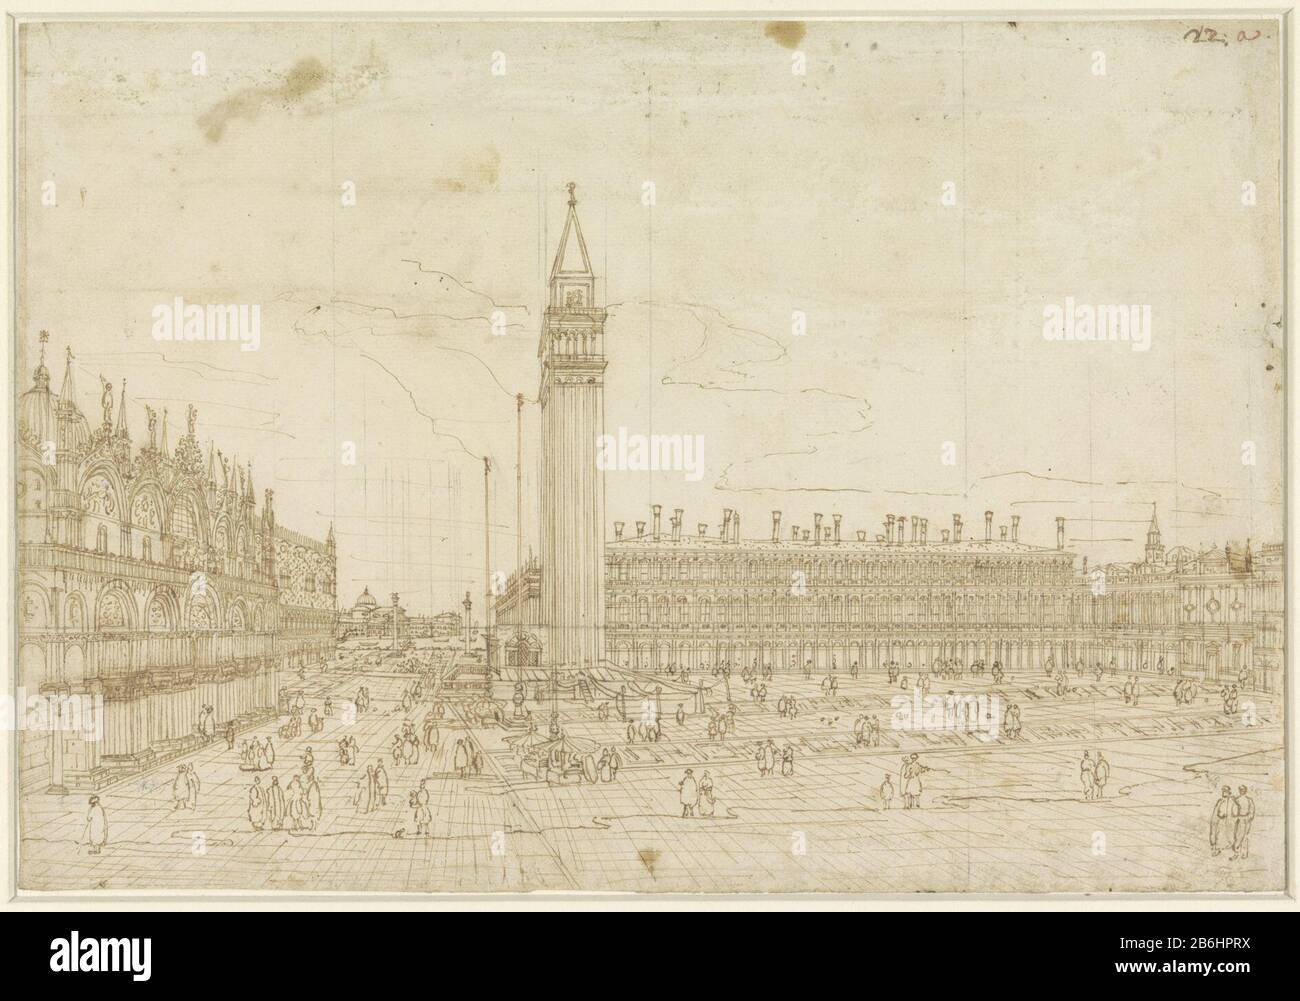 The Piazza San Marco, towards the Piazzetta seen RP-T-1953-217 The Piazza San Marco, in the direction of the piazetta given object type: drawing Object number: RP-T-1953-217 Manufacturer :  draftsman: Bernardo Bell Otto Date: 1730 - 1780 Physical characteristics: pen in brown, sketch in pencil material: paper pencil ink Technique: pen Dimensions: h 260 mm × W 378 mm Subject: names of historical buildings, sites, streets, etc. (campanile) church (exterior) names of historical buildings, sites, streets, etc. (San Marco) square, place circus etc.geographical names of countries, regions, mountains Stock Photo